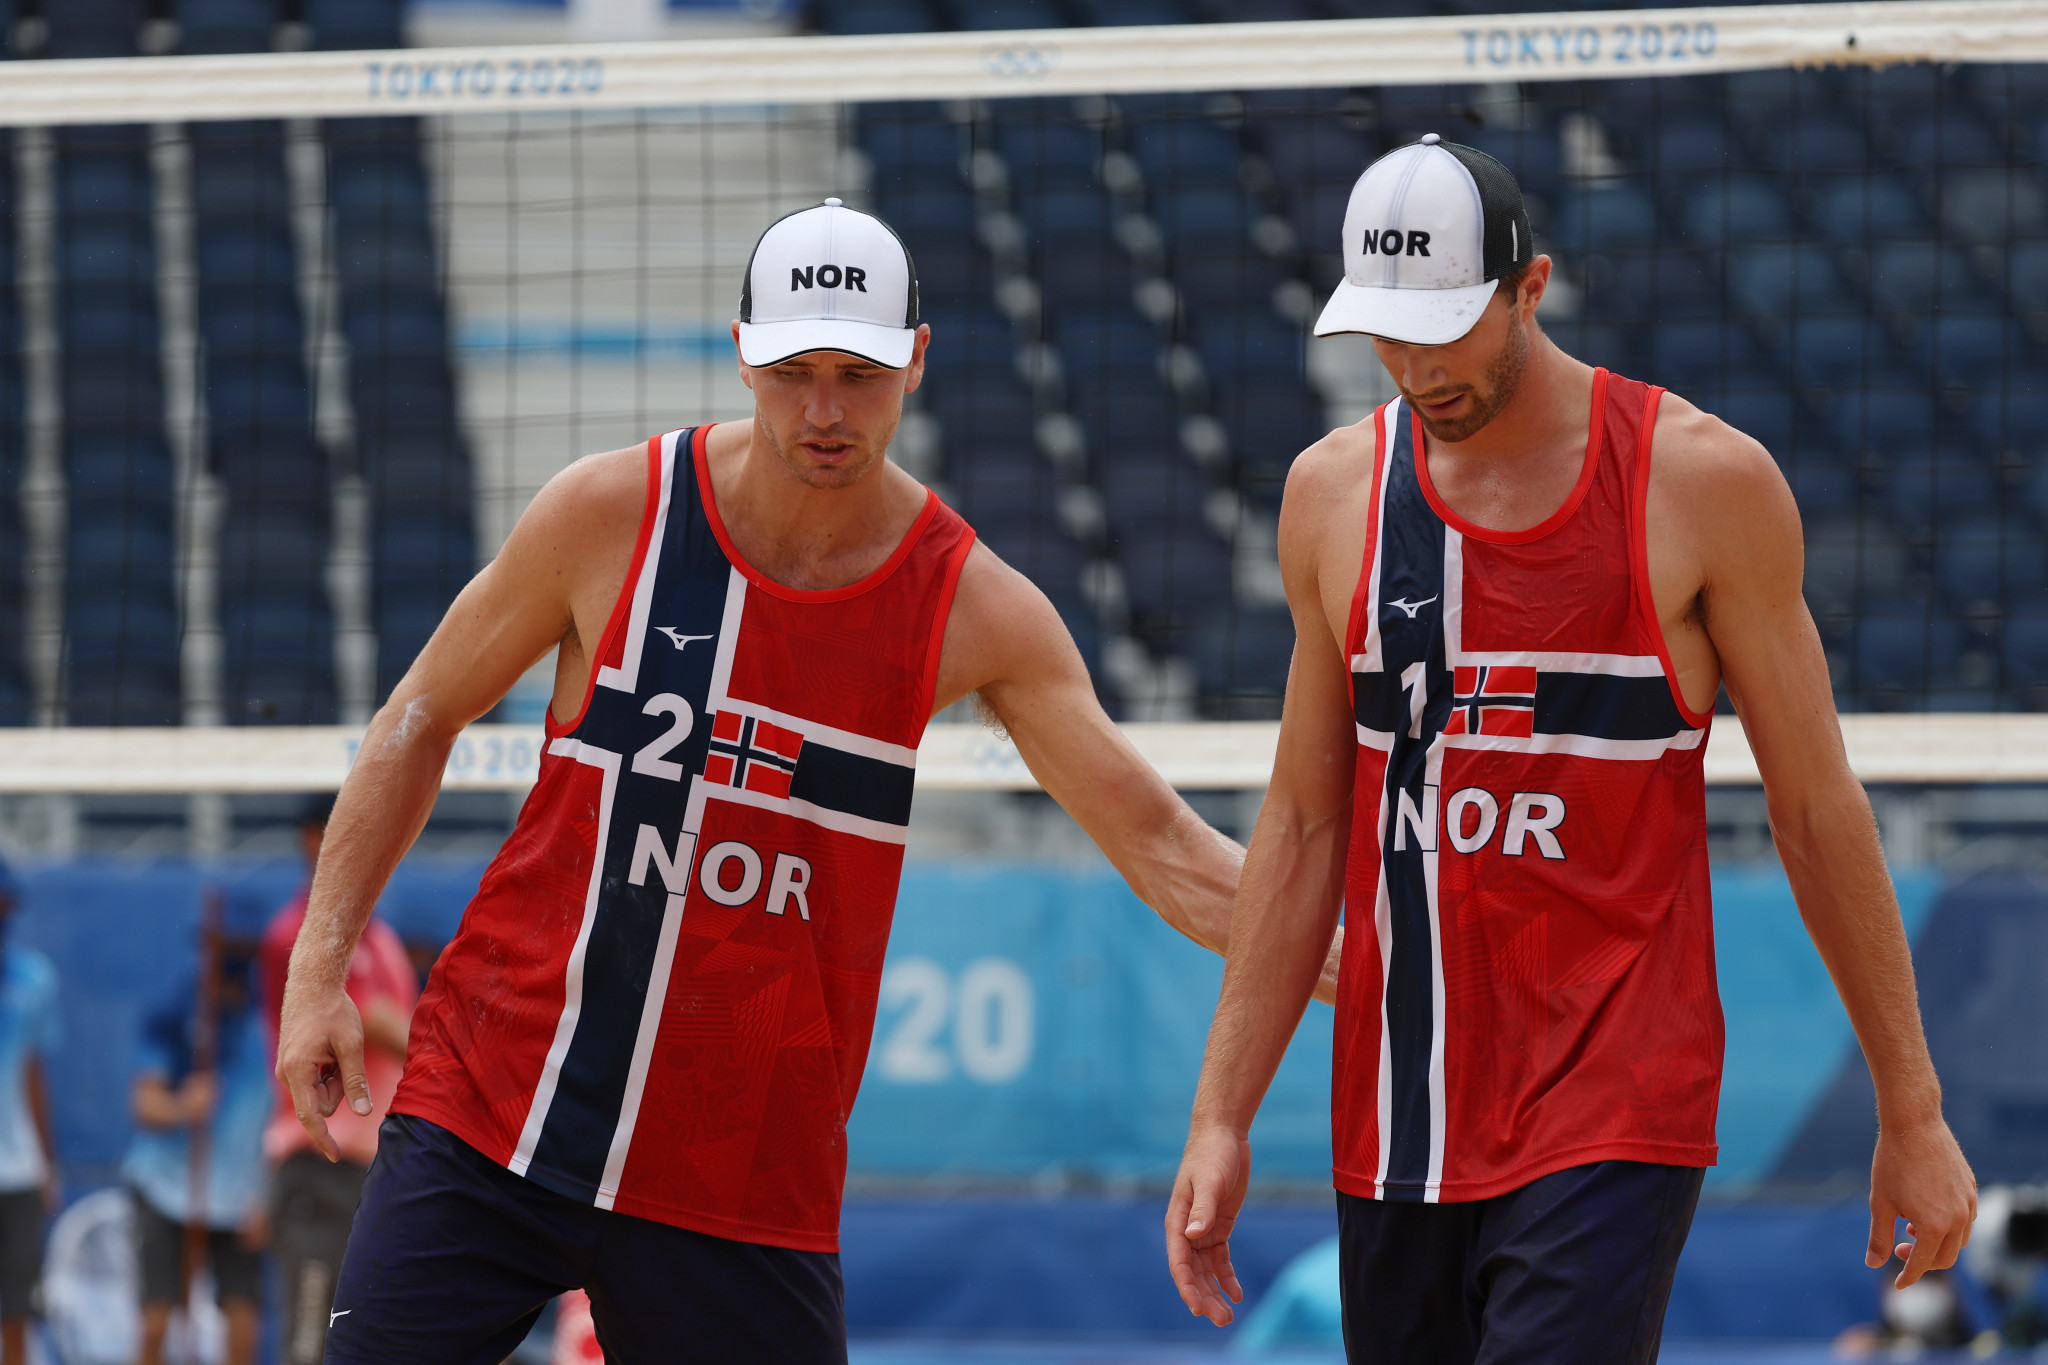 Christian Sørum, left, and Anders Mol, right, are the current Olympic and world champions ©Getty Images